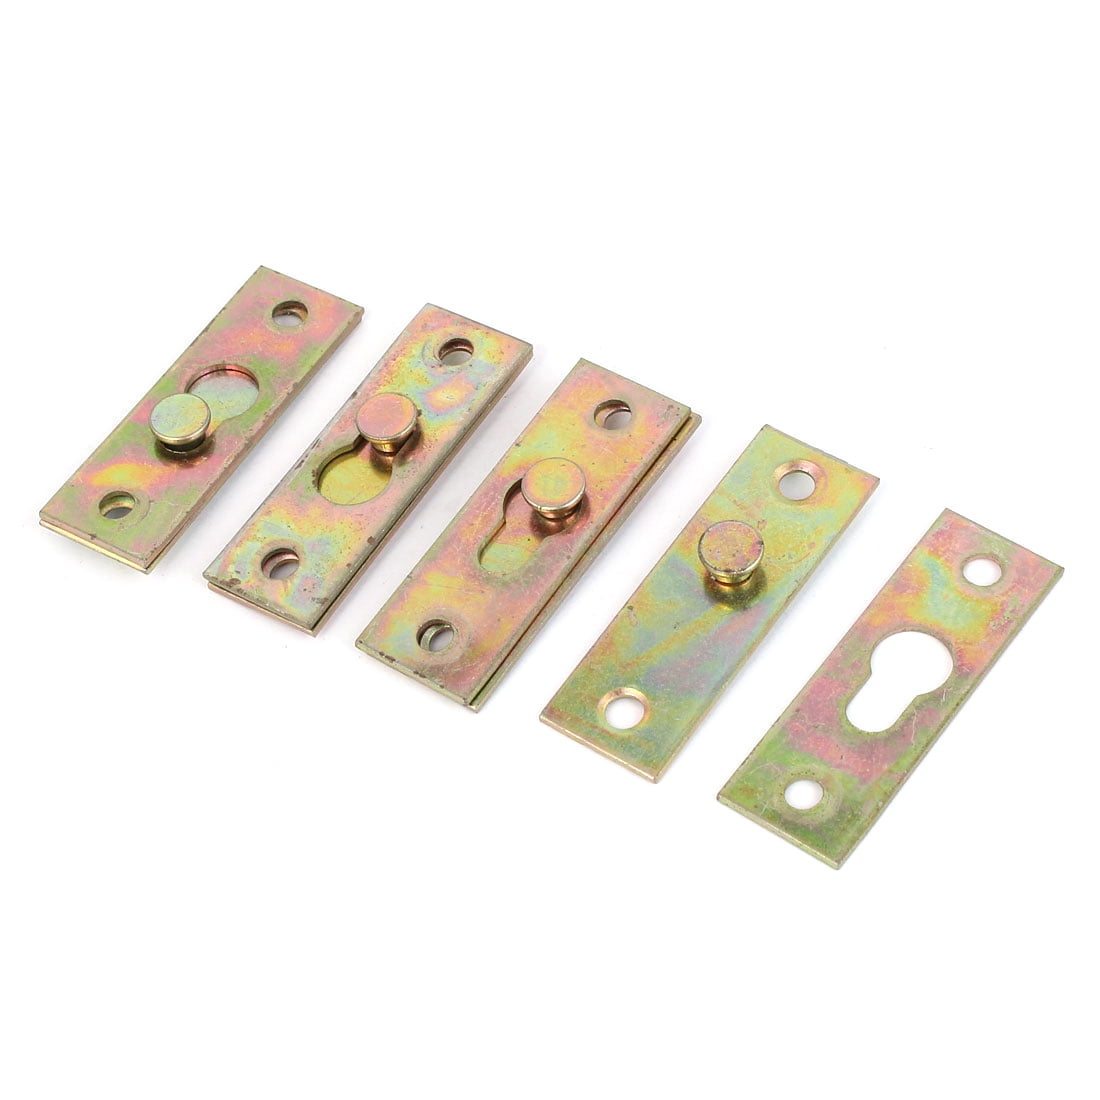 Wooden Bed Rail Hook Plate